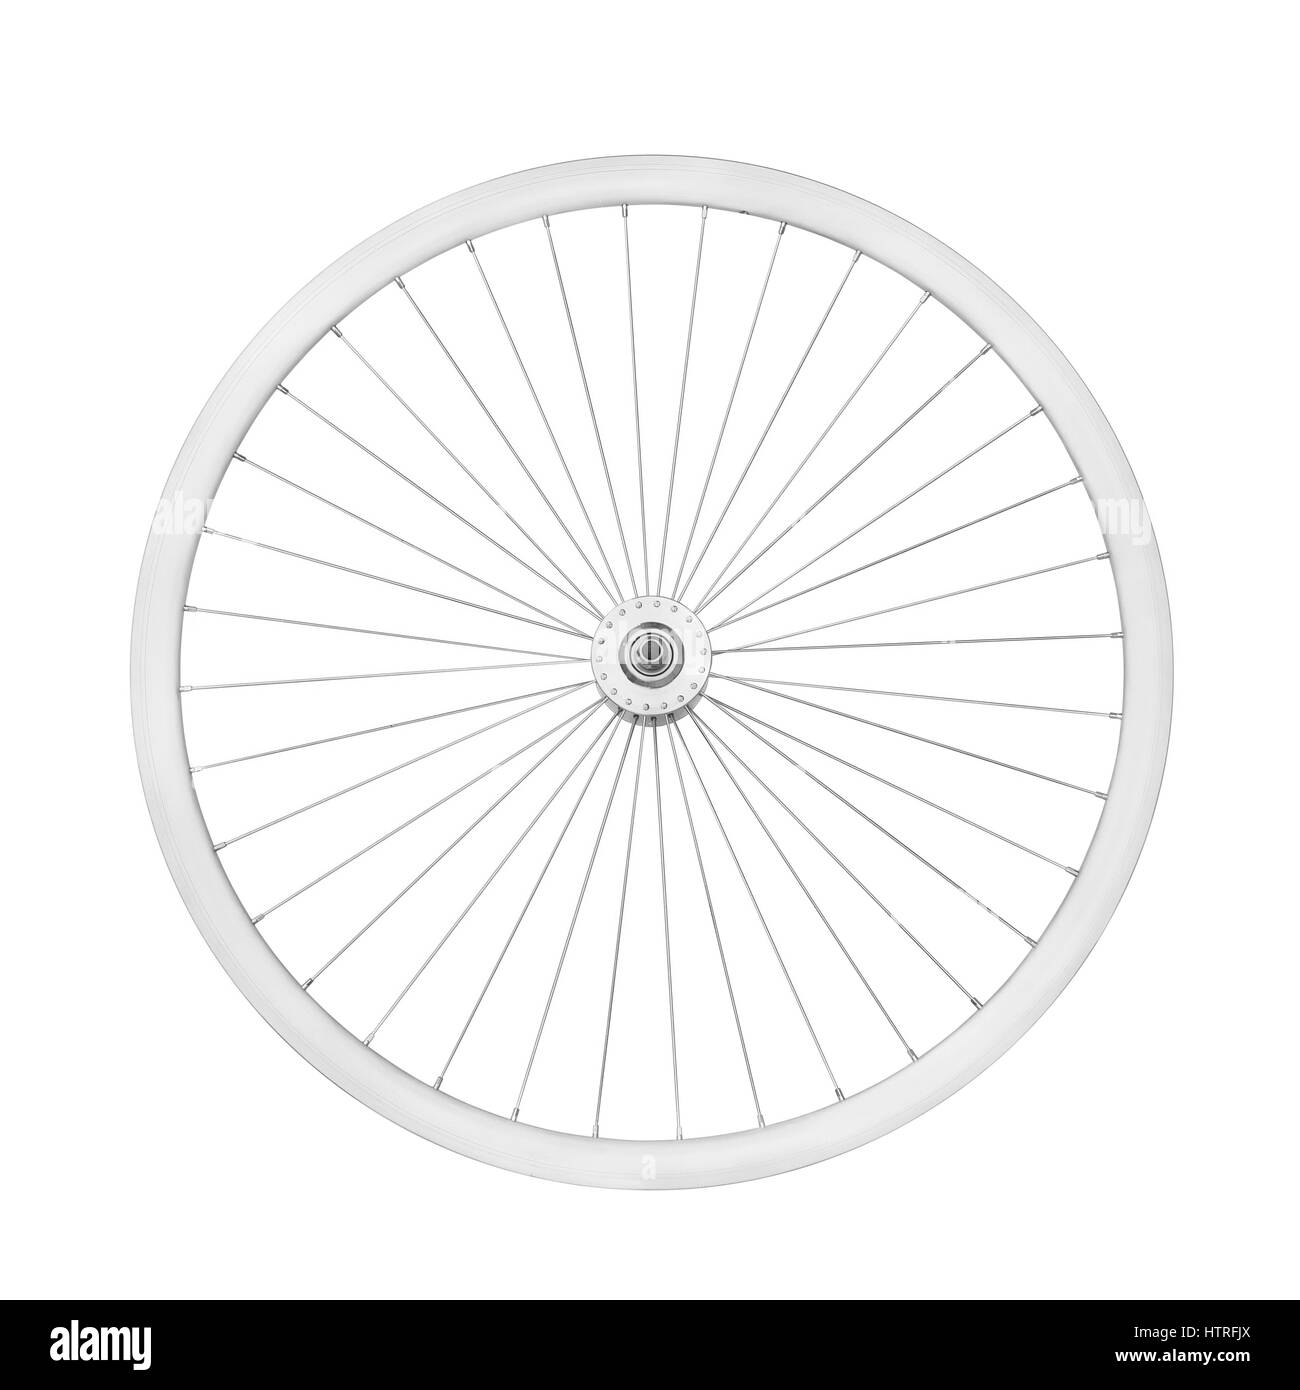 Aluminum bicycle wheel without tire. Top view, isolated on white, clipping path included Stock Photo